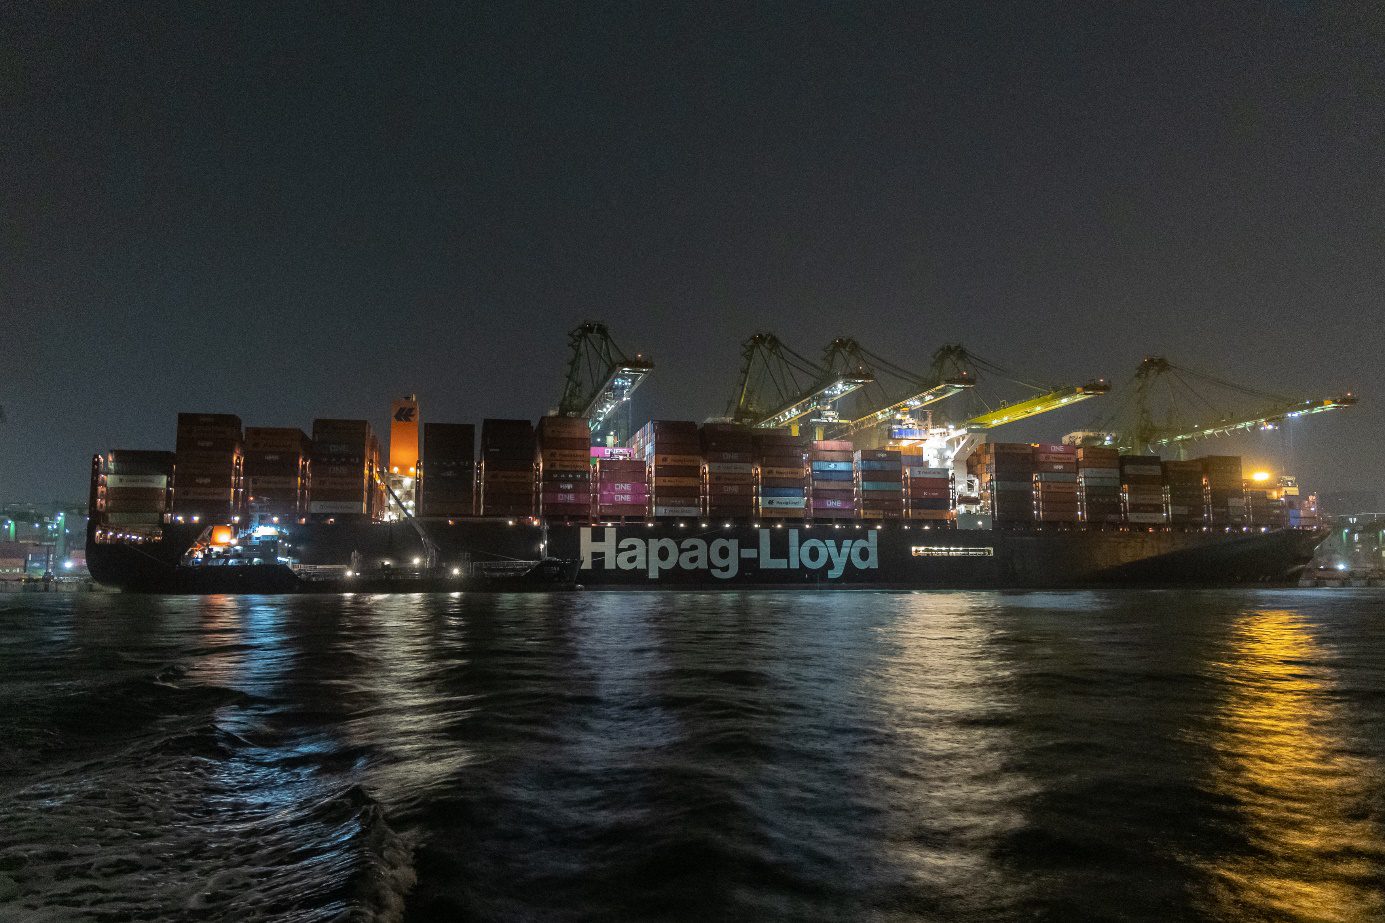 TotalEnergies Marine Fuels, Hapag-Lloyd and Jurong Port Universal Terminal Kick-start First Biofuel Bunker Term Delivery in Singapore